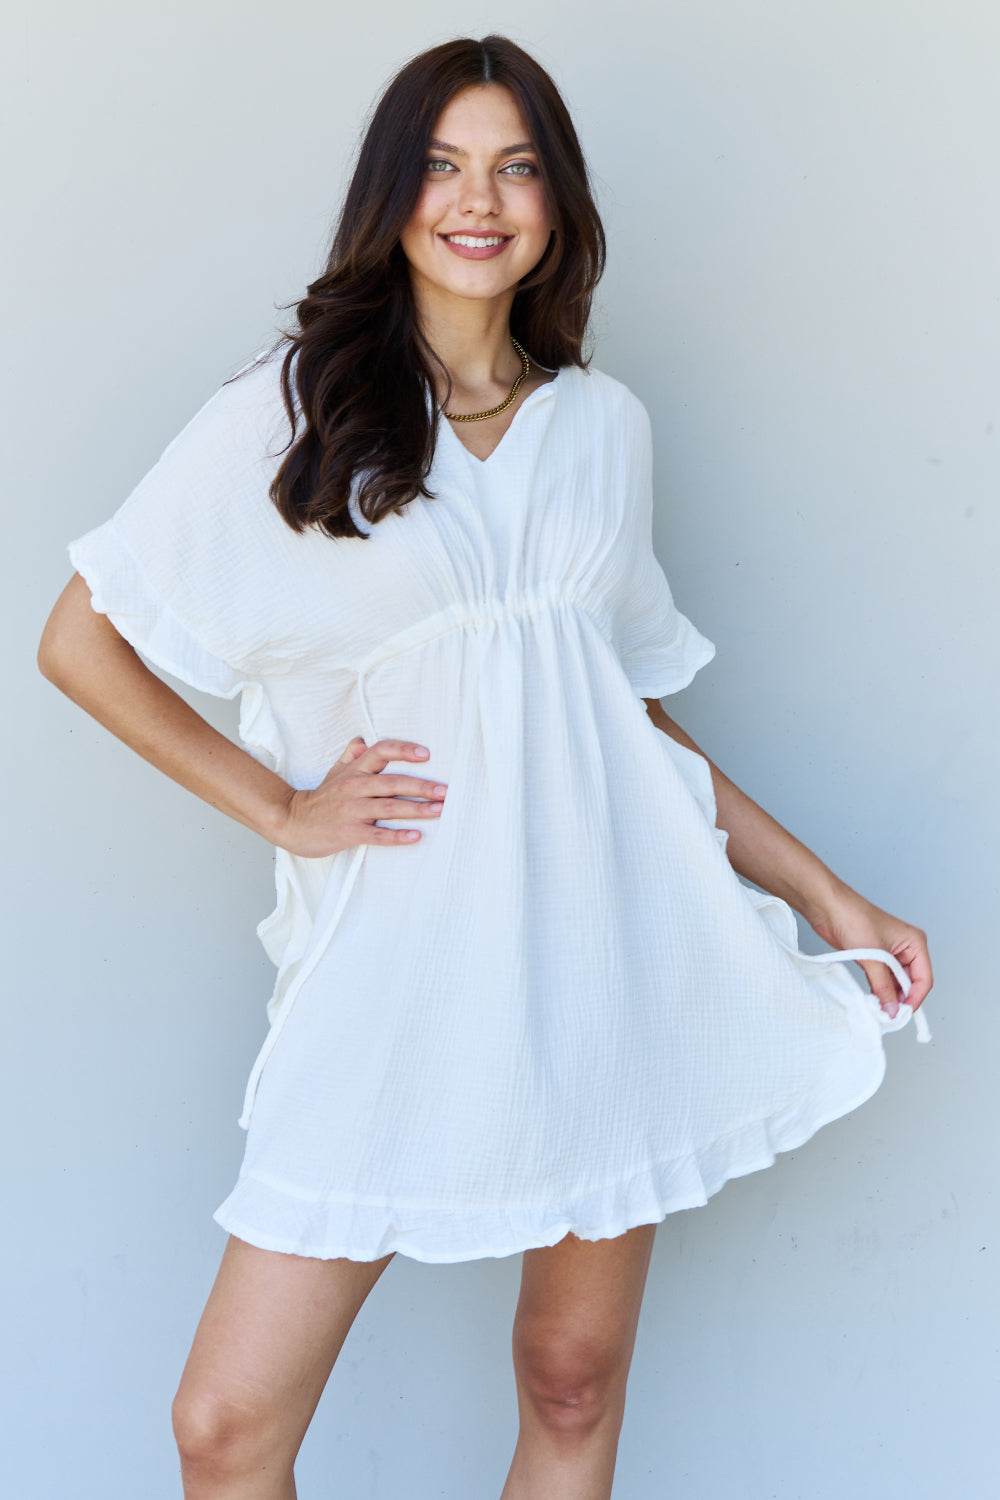 Ninexis Out Of Time Full Size Ruffle Hem Dress with Drawstring Waistband in White - Tigbul's Fashion